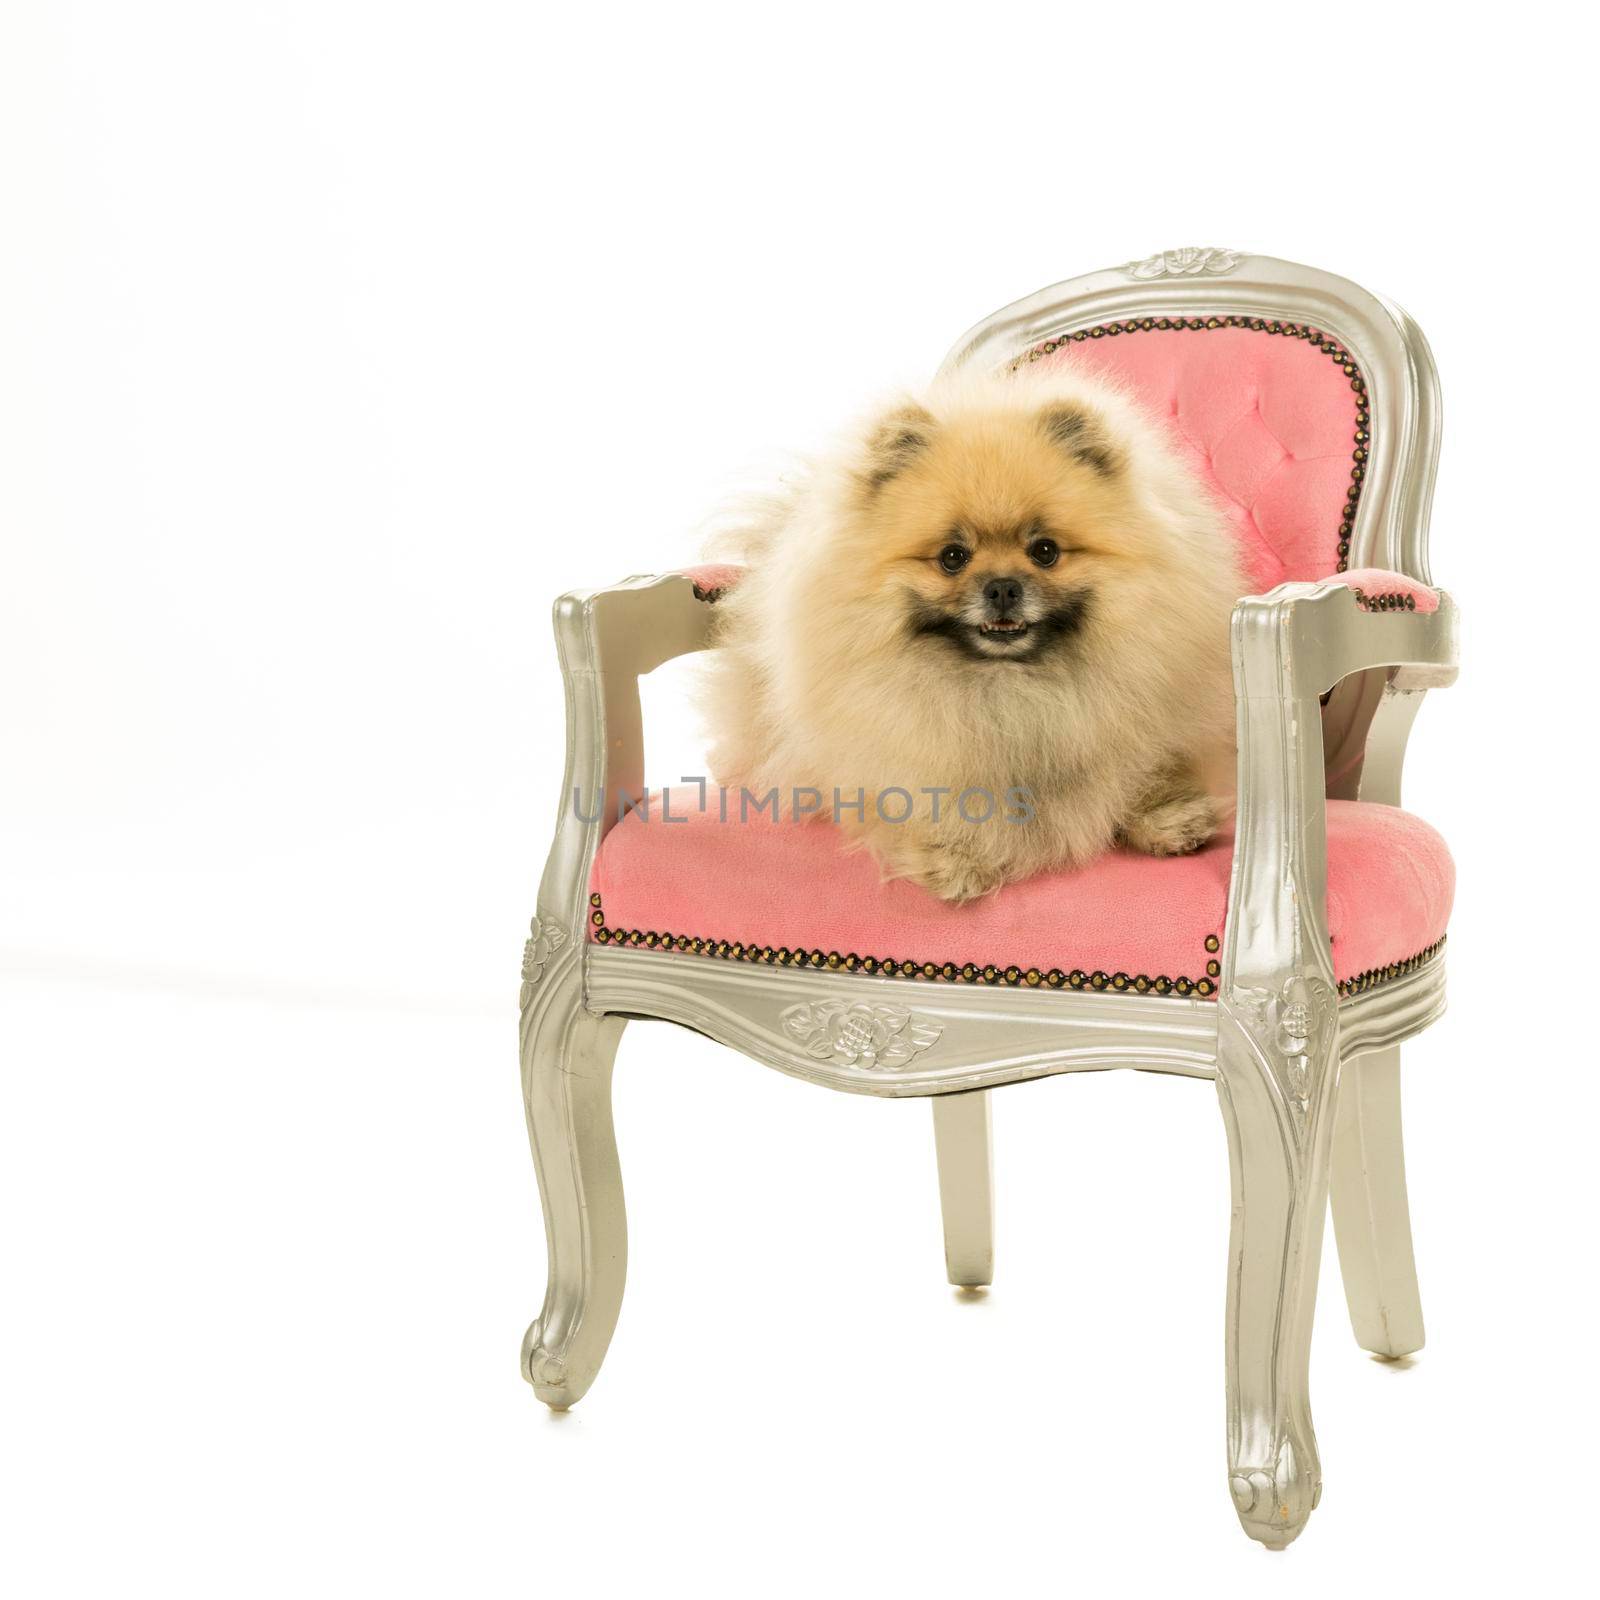 Cute cream and brown Pomeranian - Dwarf Spitz dog sitting in a pink baroque chair  isolated on a white background by LeoniekvanderVliet